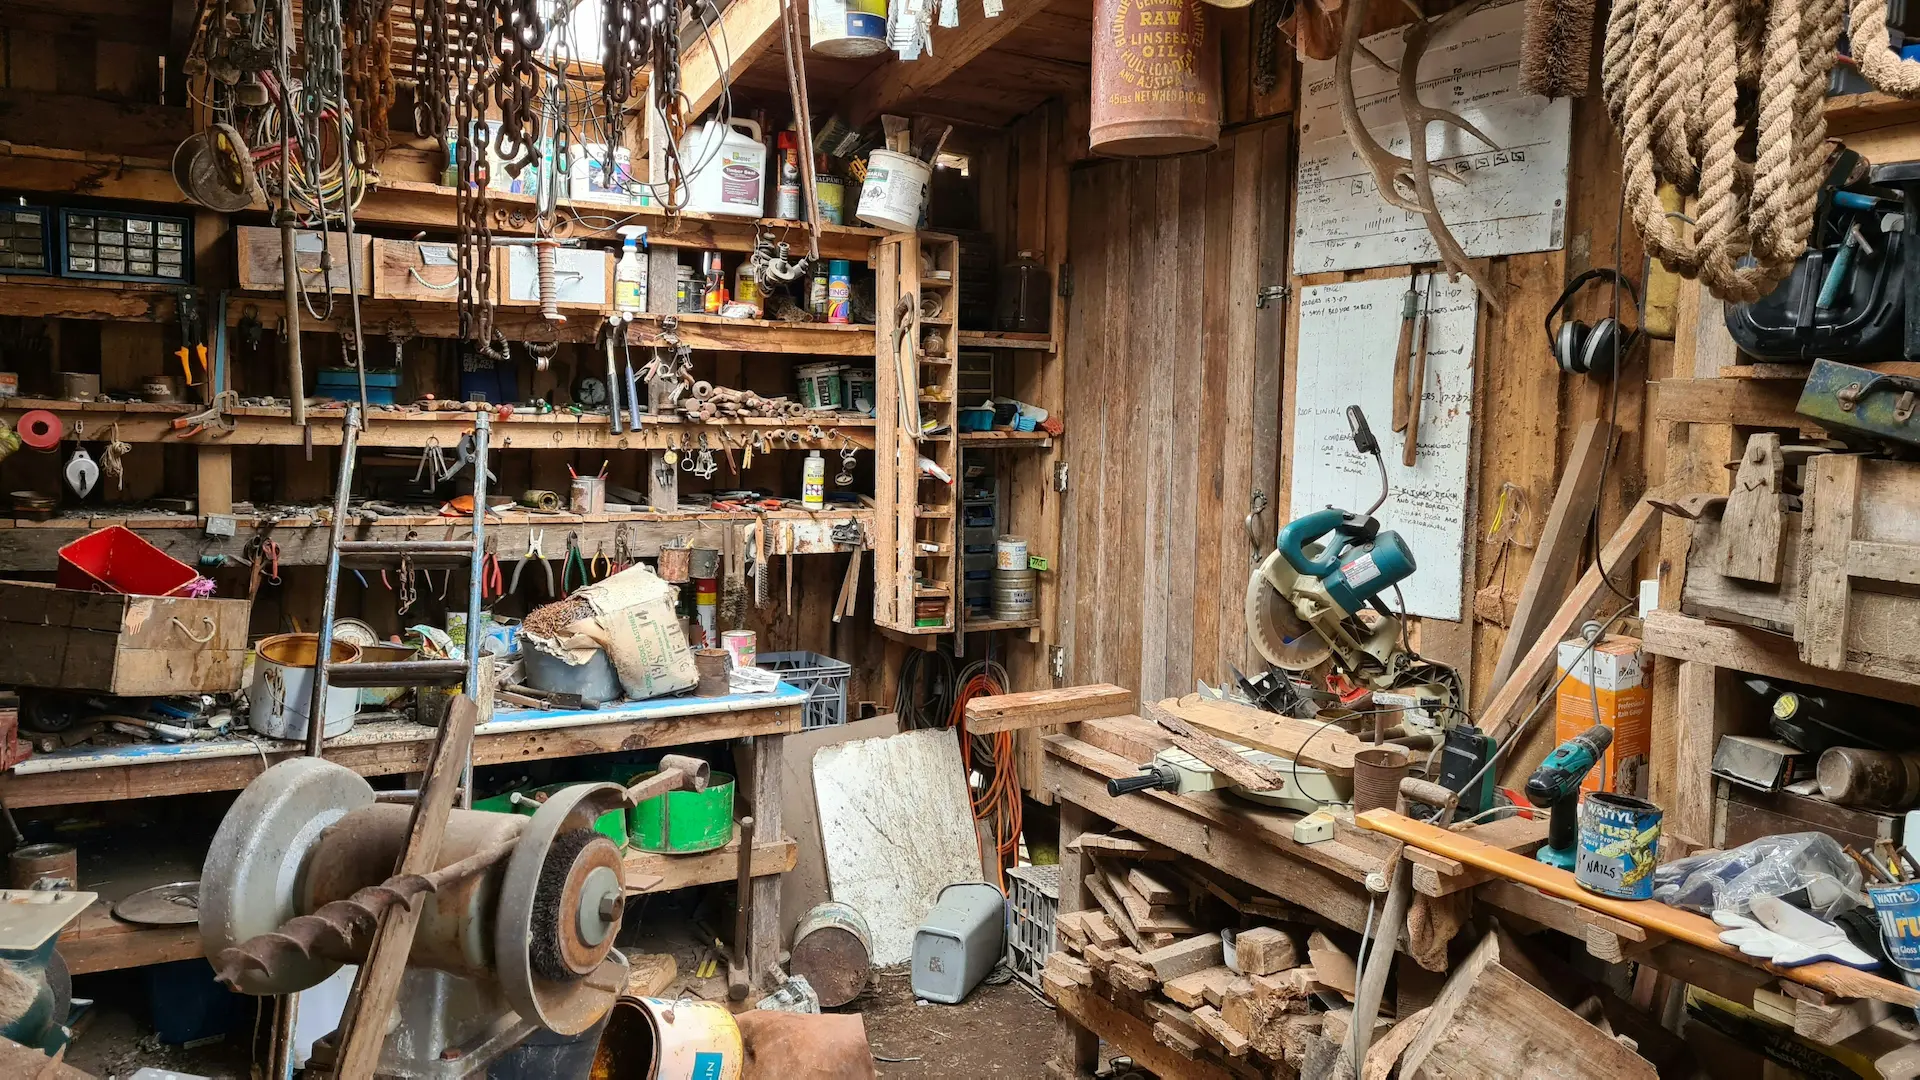 A very messy woodworking shop with scrapwood everywhere.